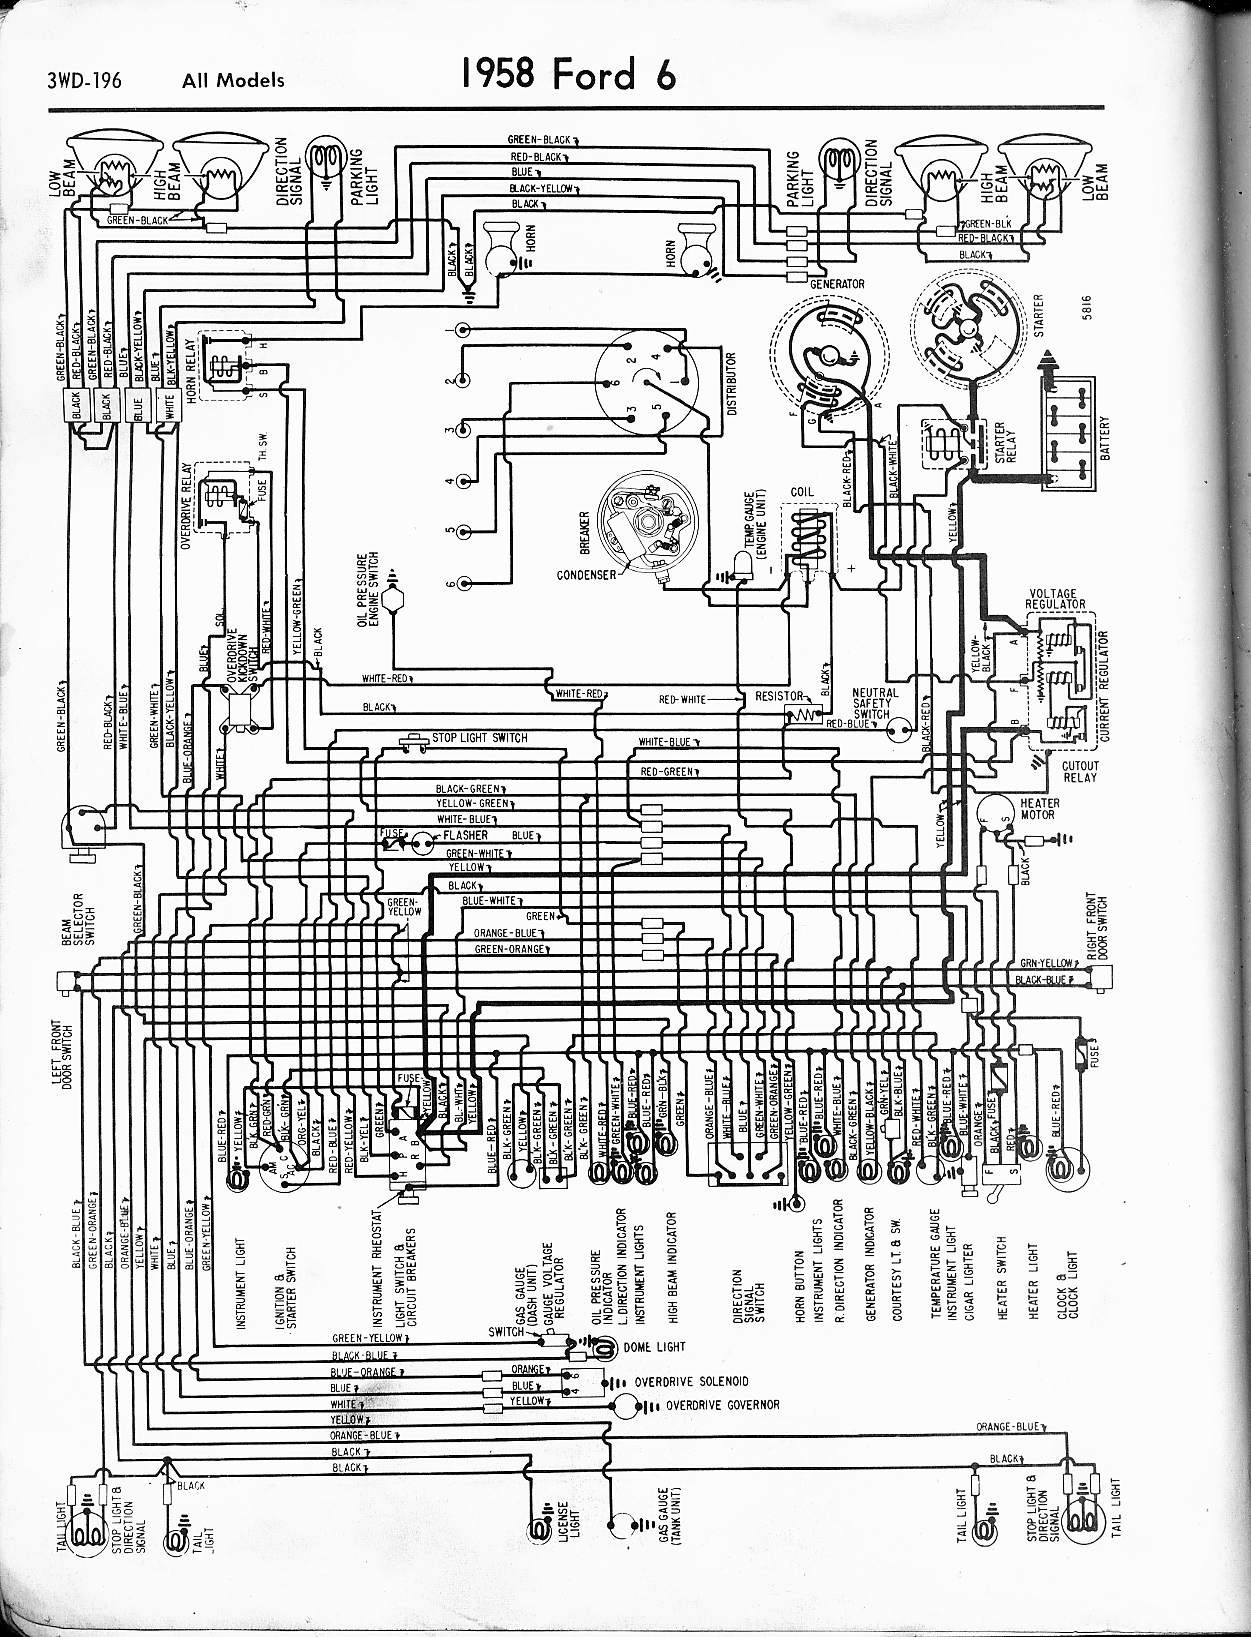 2001 ford 5 4 Engine Diagram 57 65 ford Wiring Diagrams Of 2001 ford 5 4 Engine Diagram